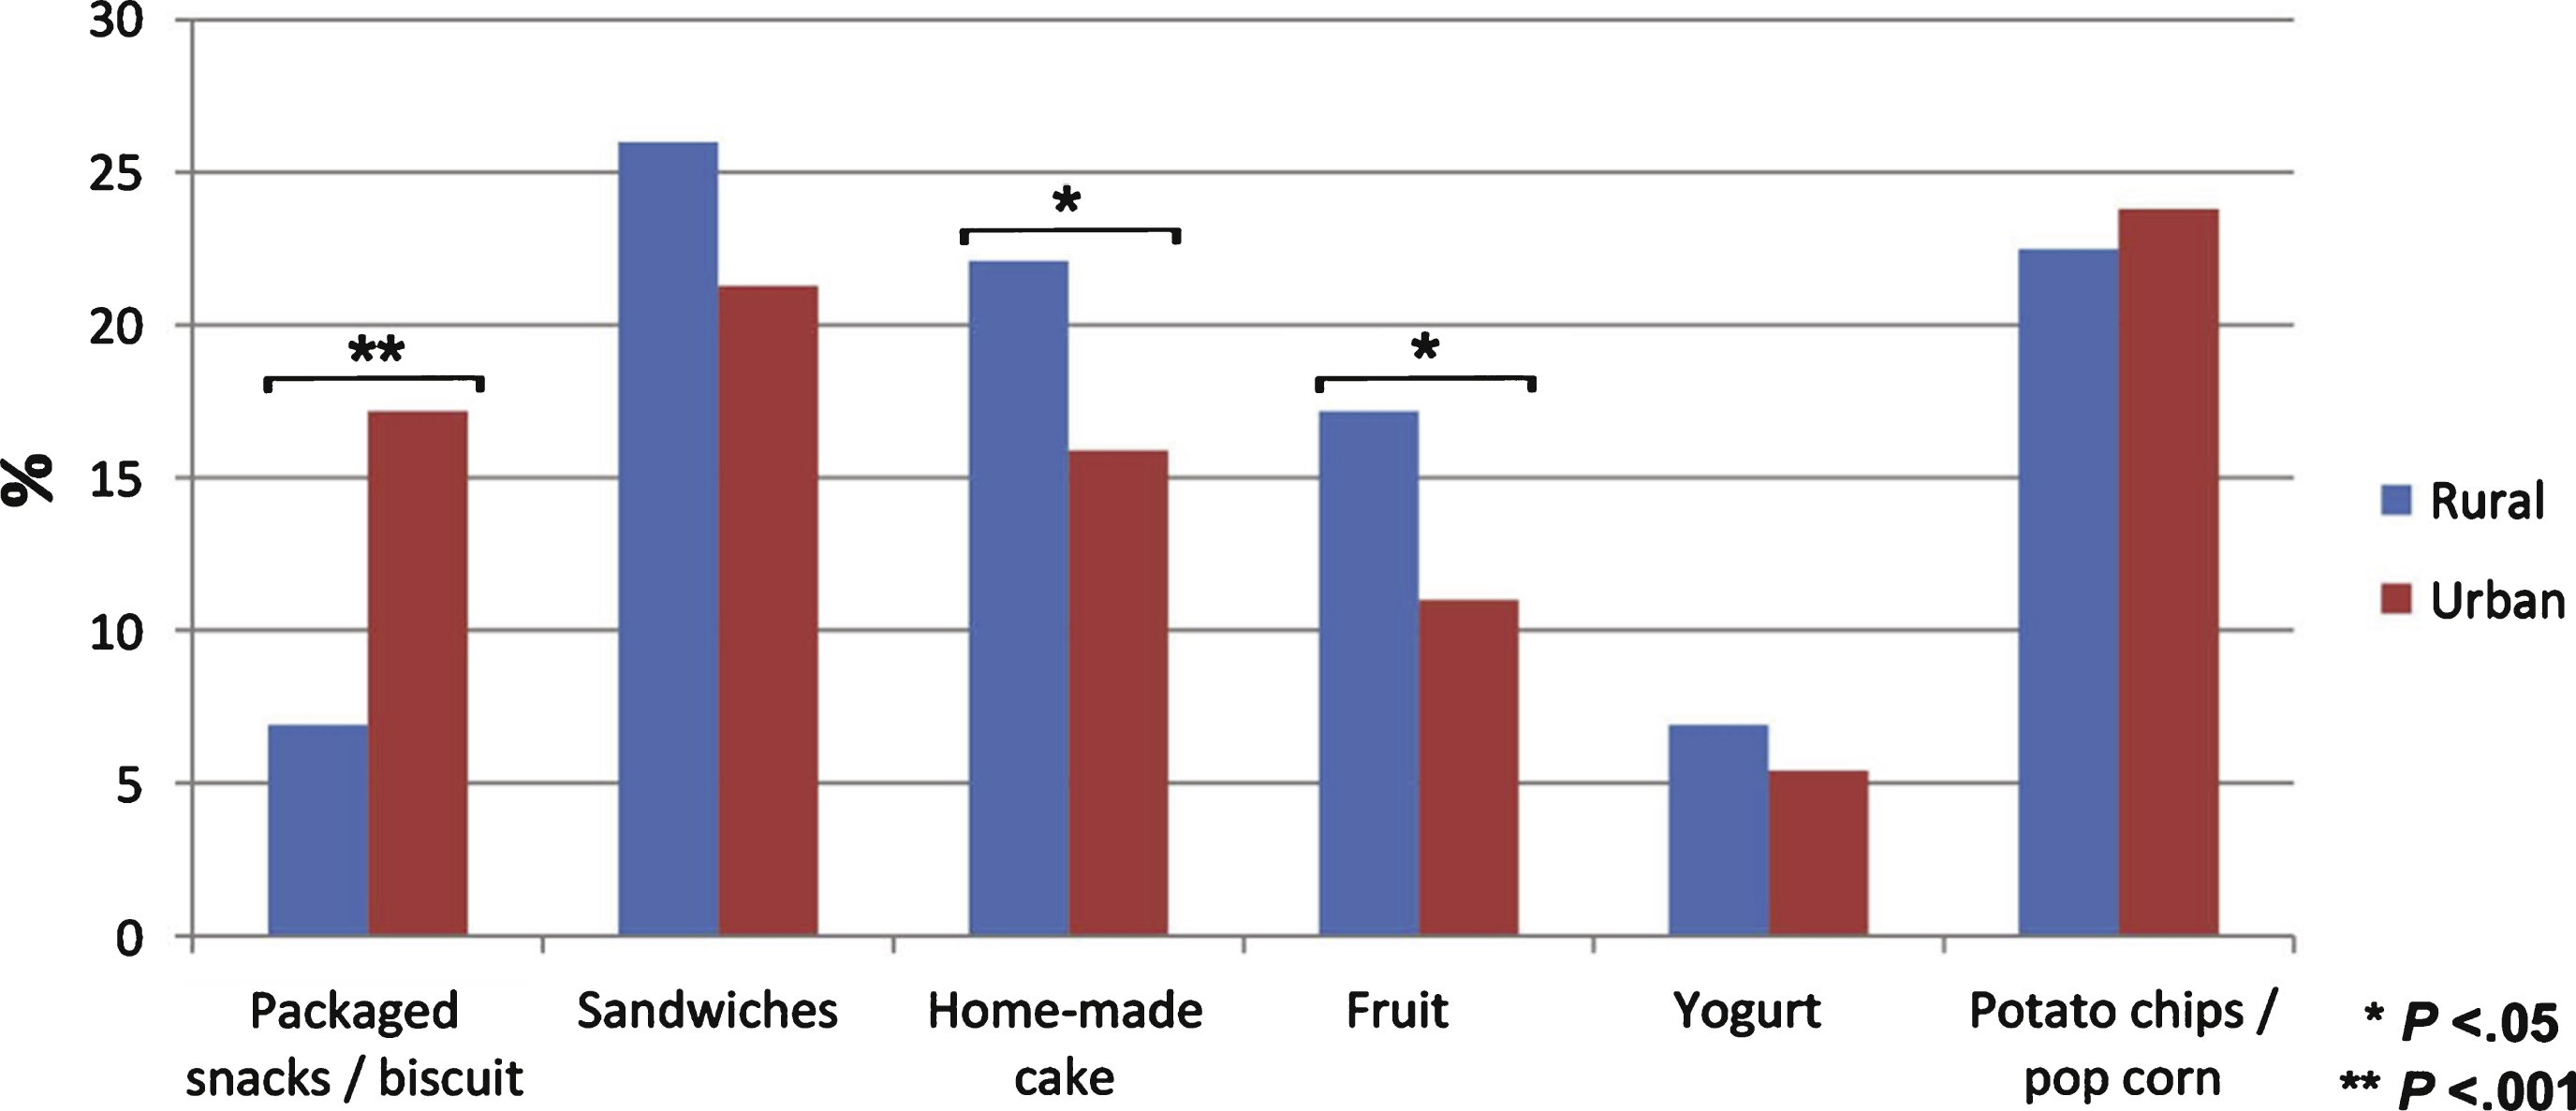 Students food preferences for snack, by place of living.